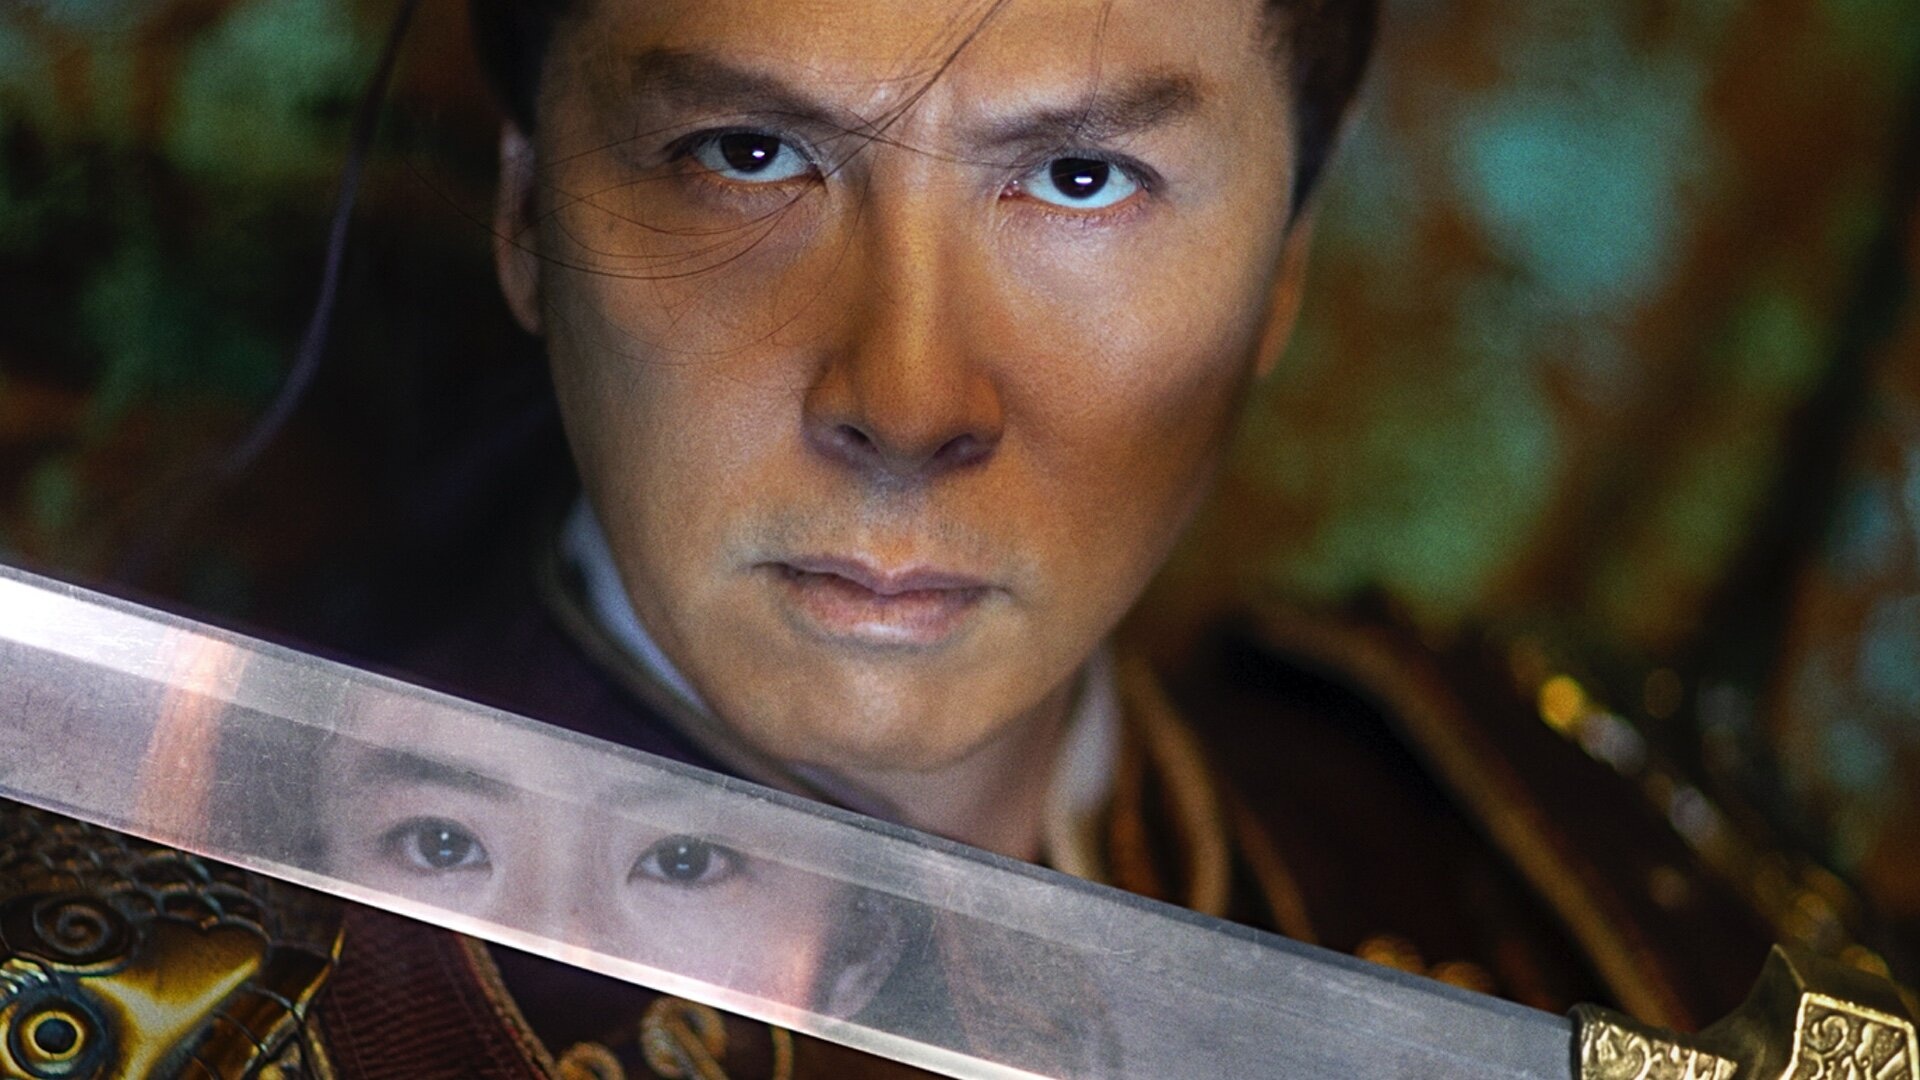 Mulan (Movie): Donnie Yen as Commander Tung, the high ranking leader of the Imperial Army. 1920x1080 Full HD Wallpaper.